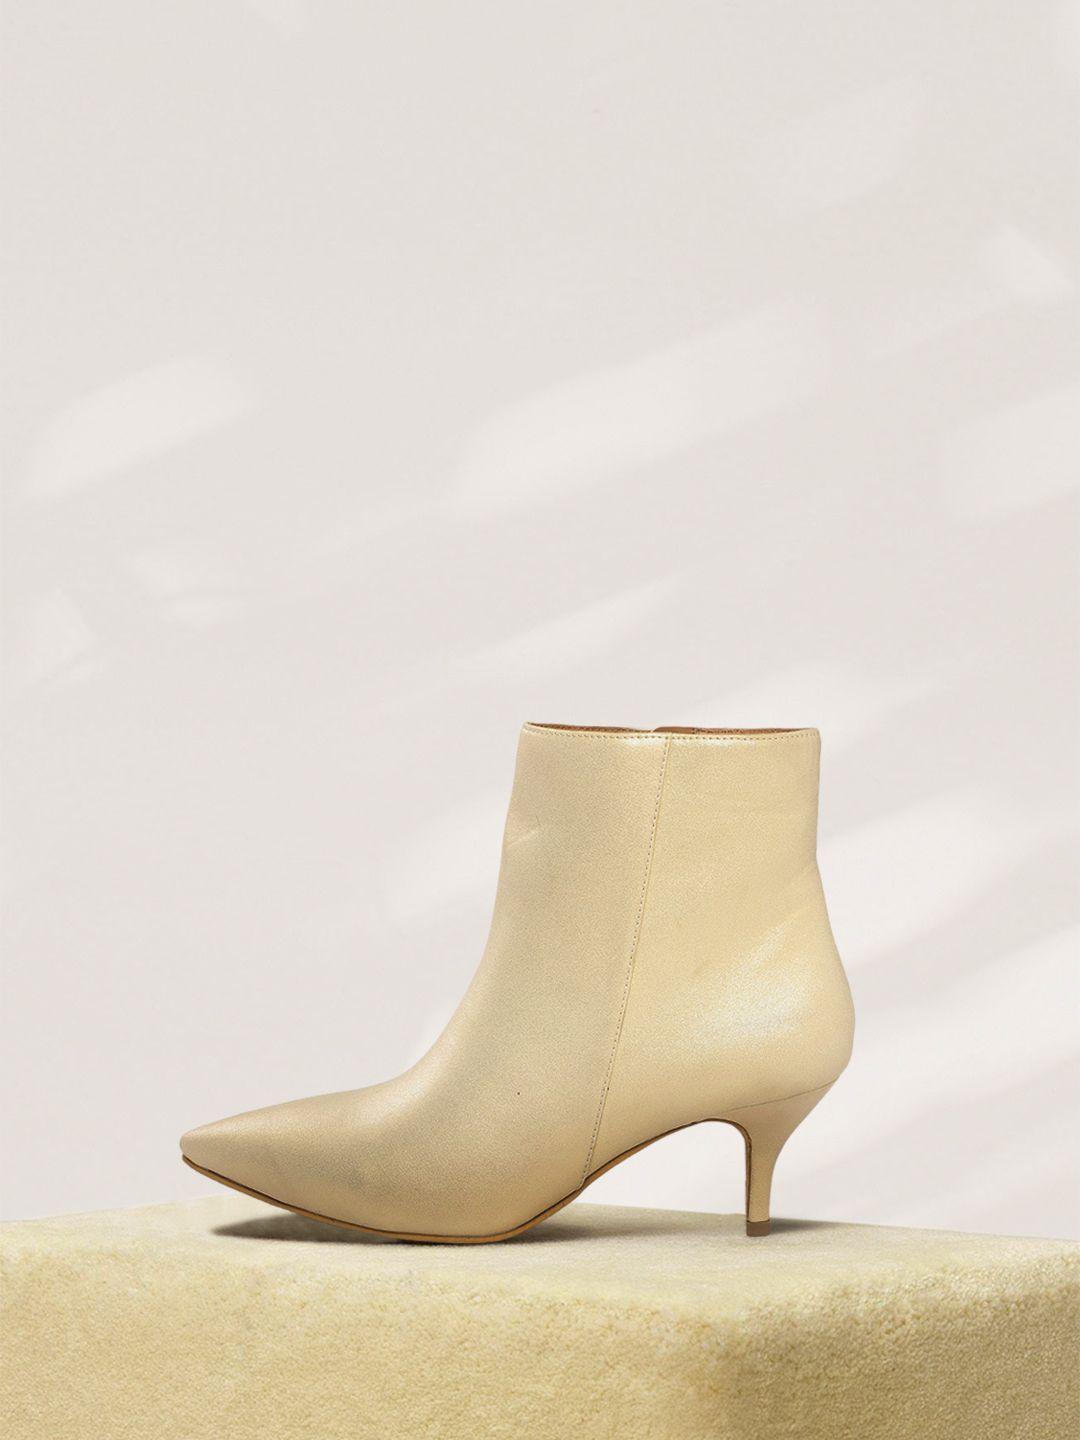 corsica muted gold-toned solid mid-top kitten heeled boots